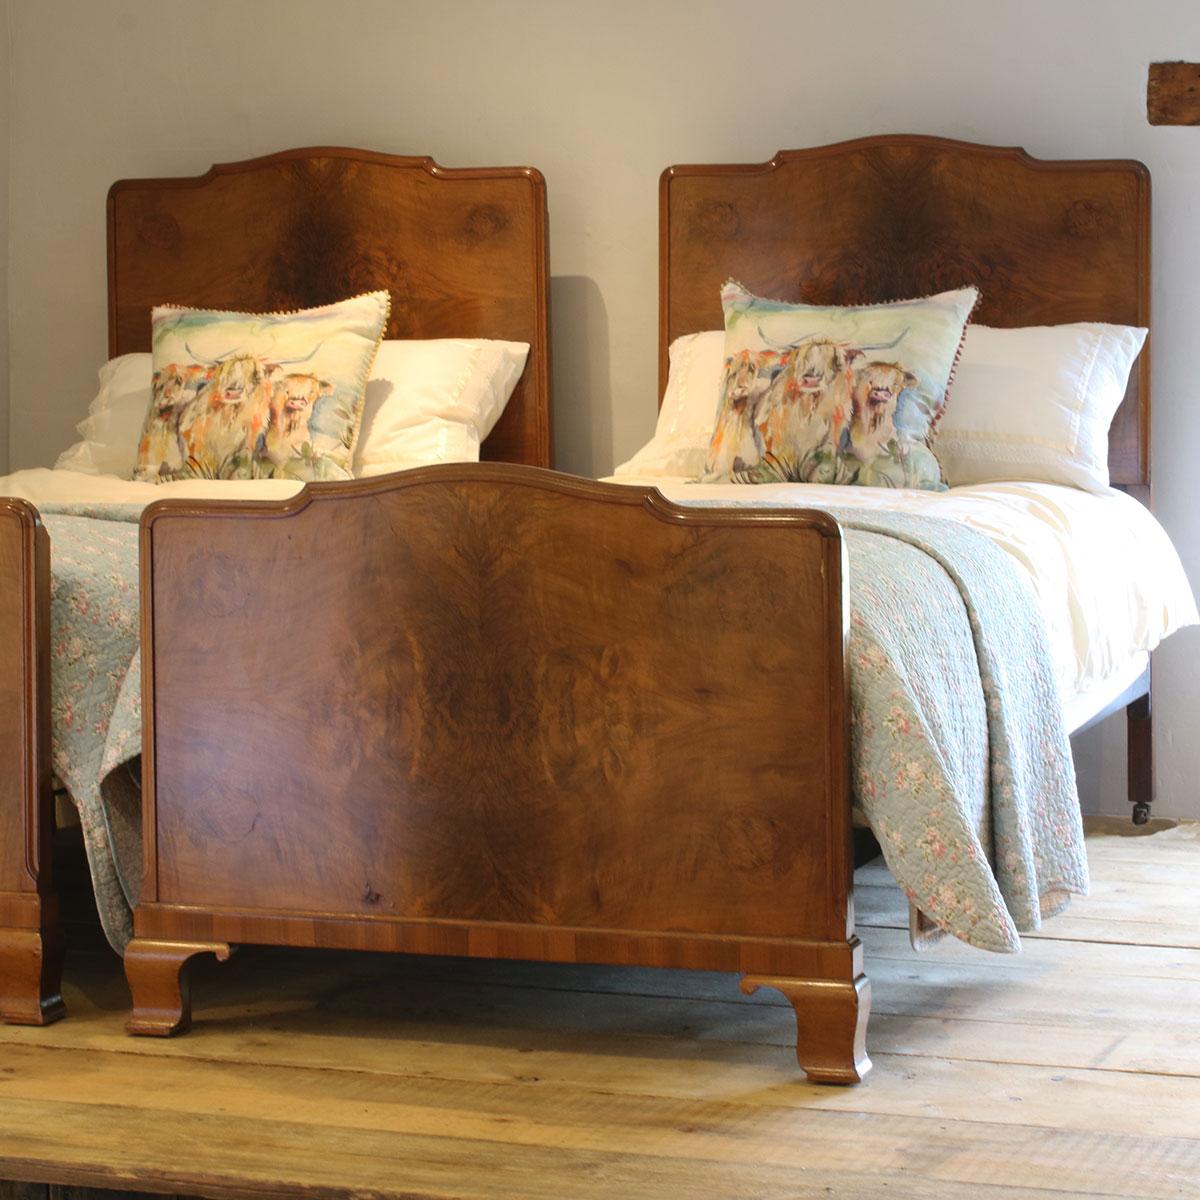 Matching pair of burr walnut early 20th century beds with shaped headboards and footboards.

These beds accept 3ft wide (36 inches) bases and mattresses. 
They can be any length required (75 inches, 78 inches or more) and can stand together to